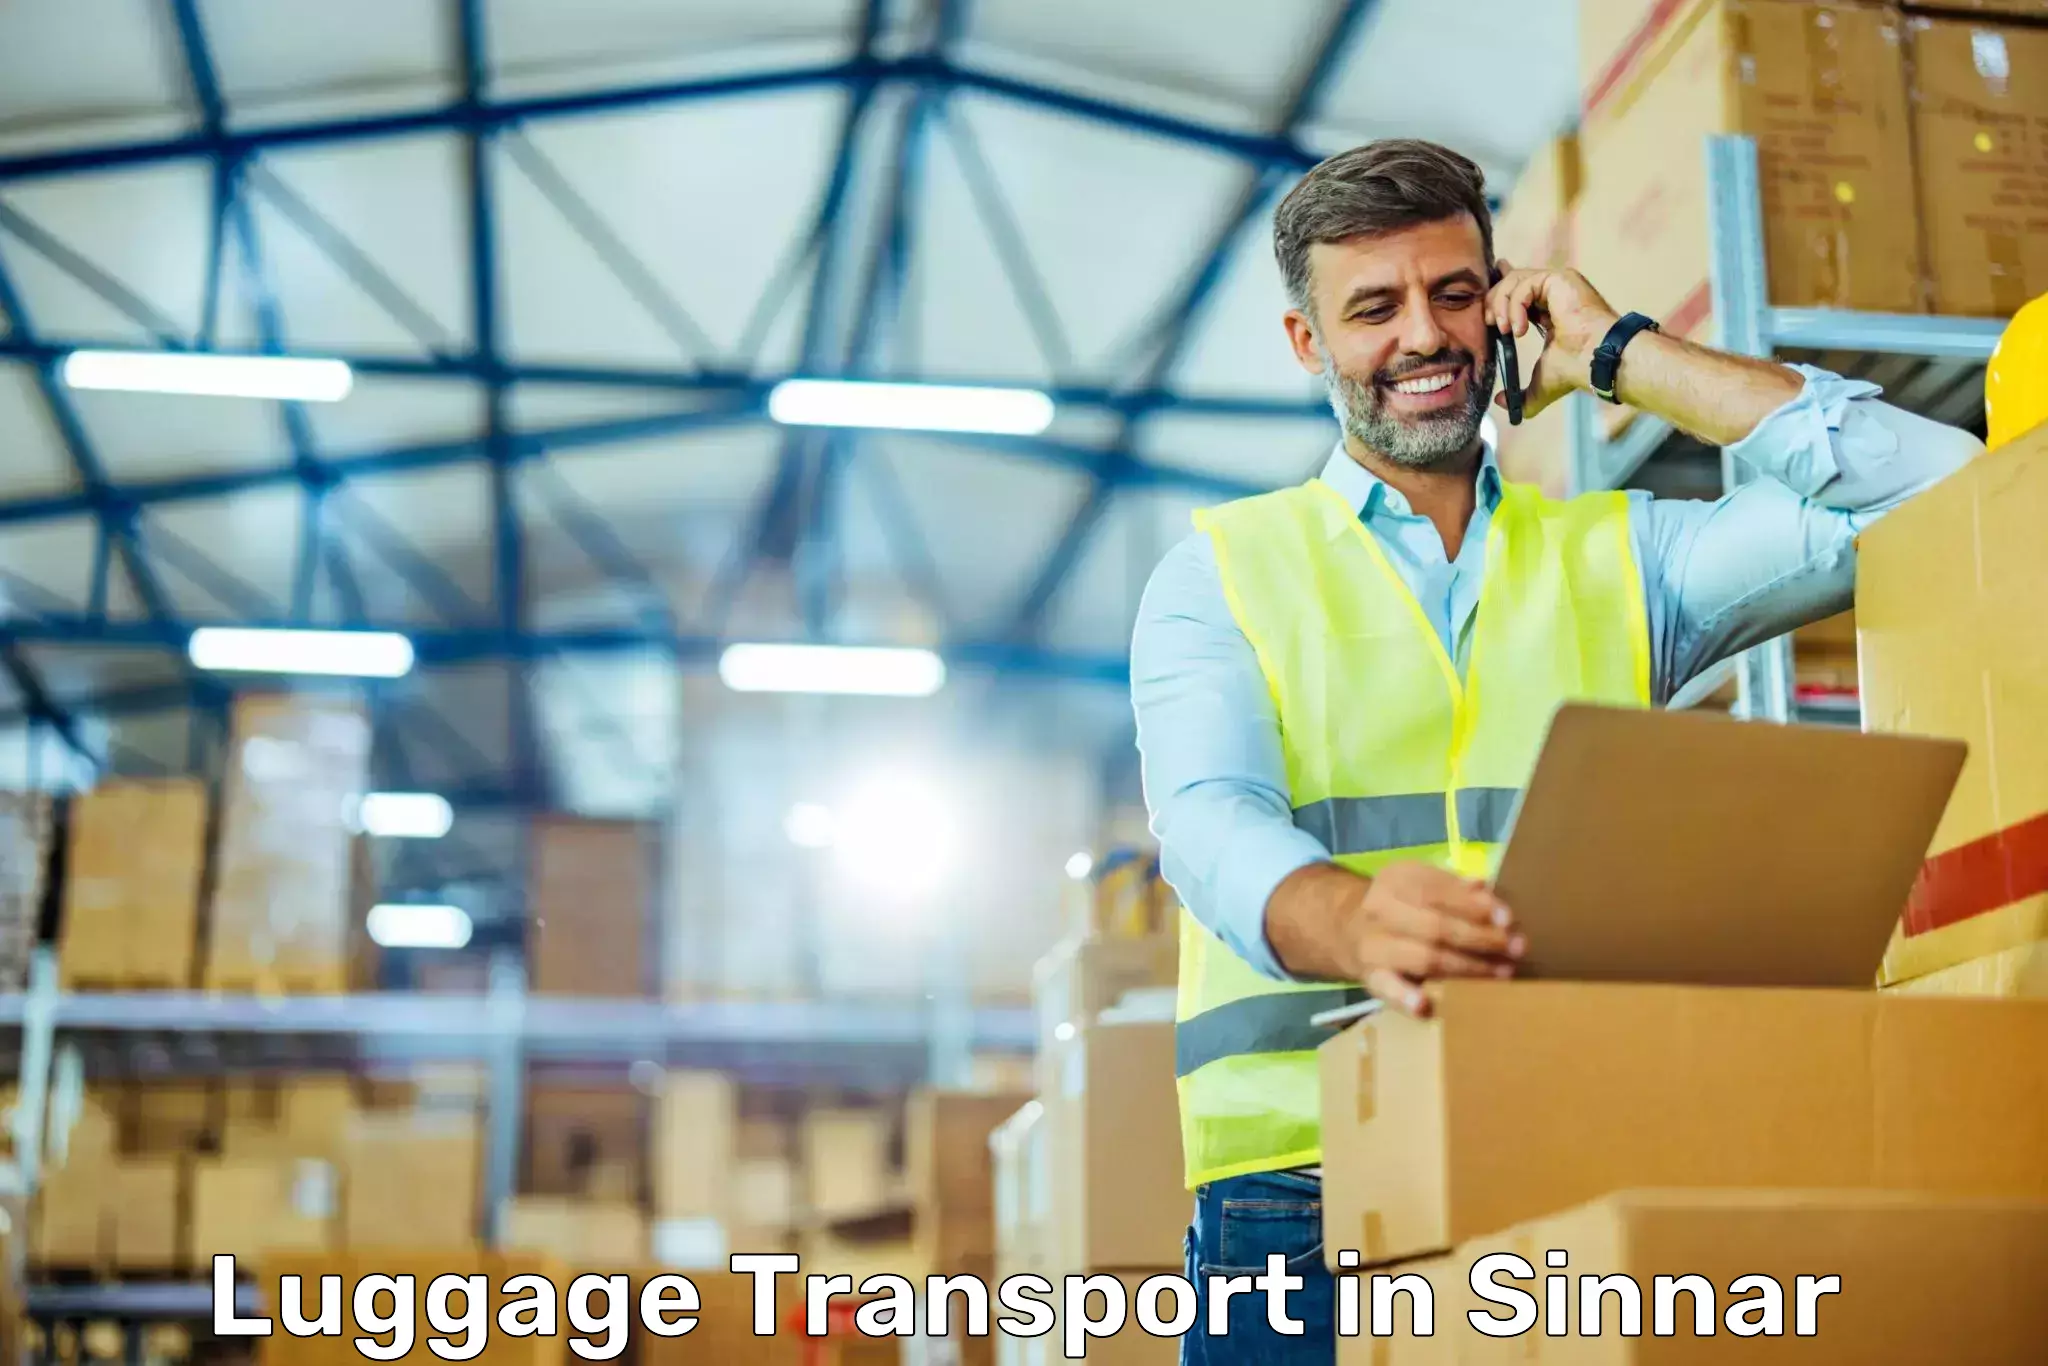 Luggage transport consulting in Sinnar